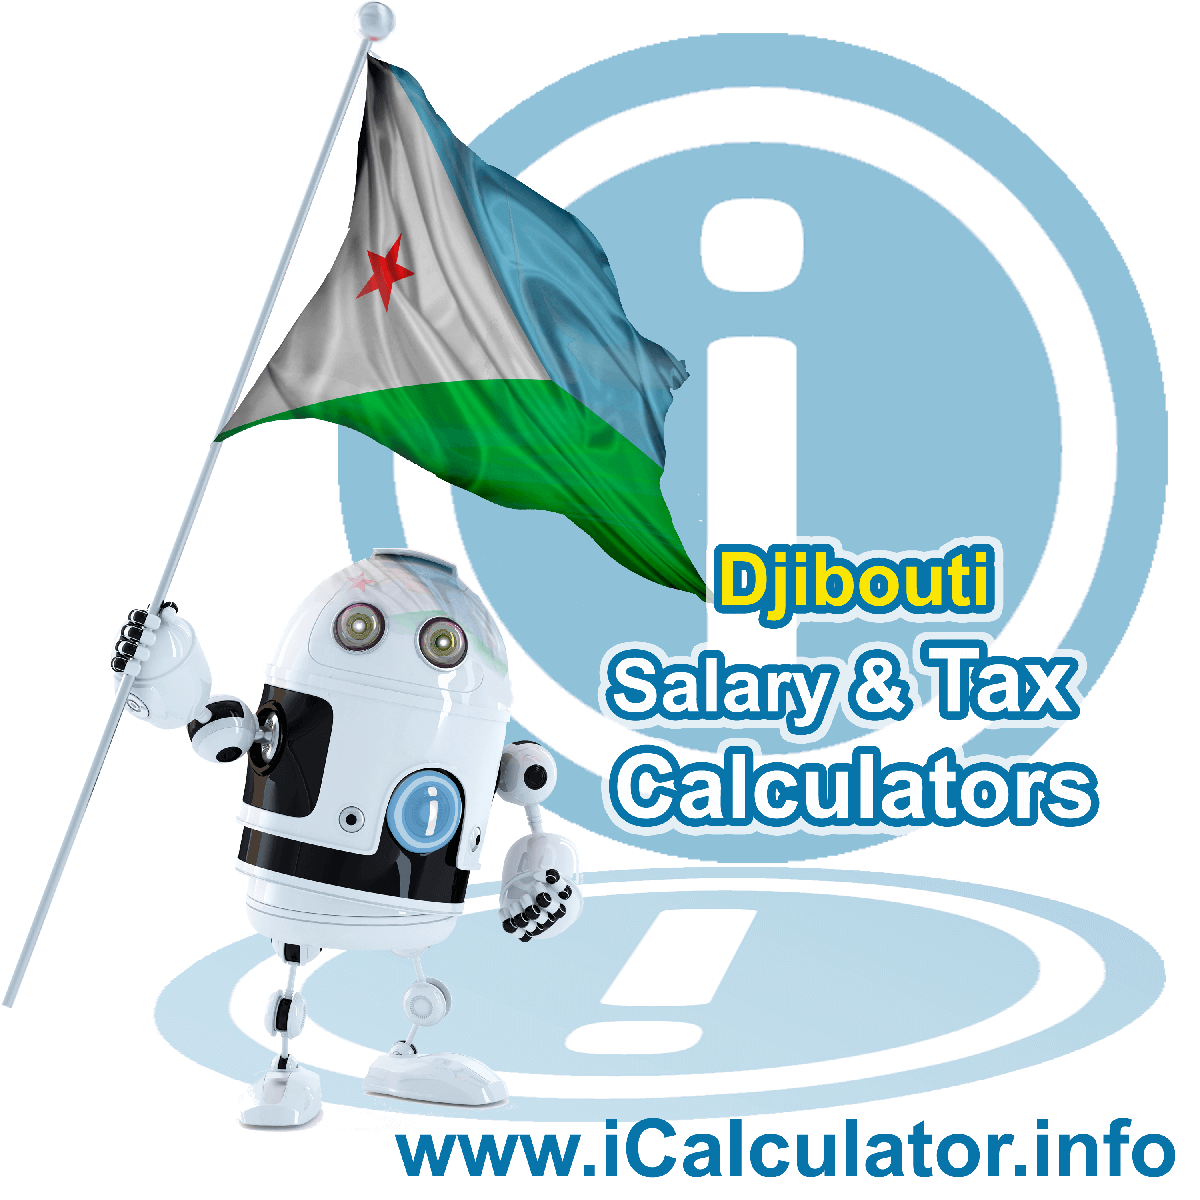 Djibouti Wage Calculator. This image shows the Djibouti flag and information relating to the tax formula for the Djibouti Tax Calculator